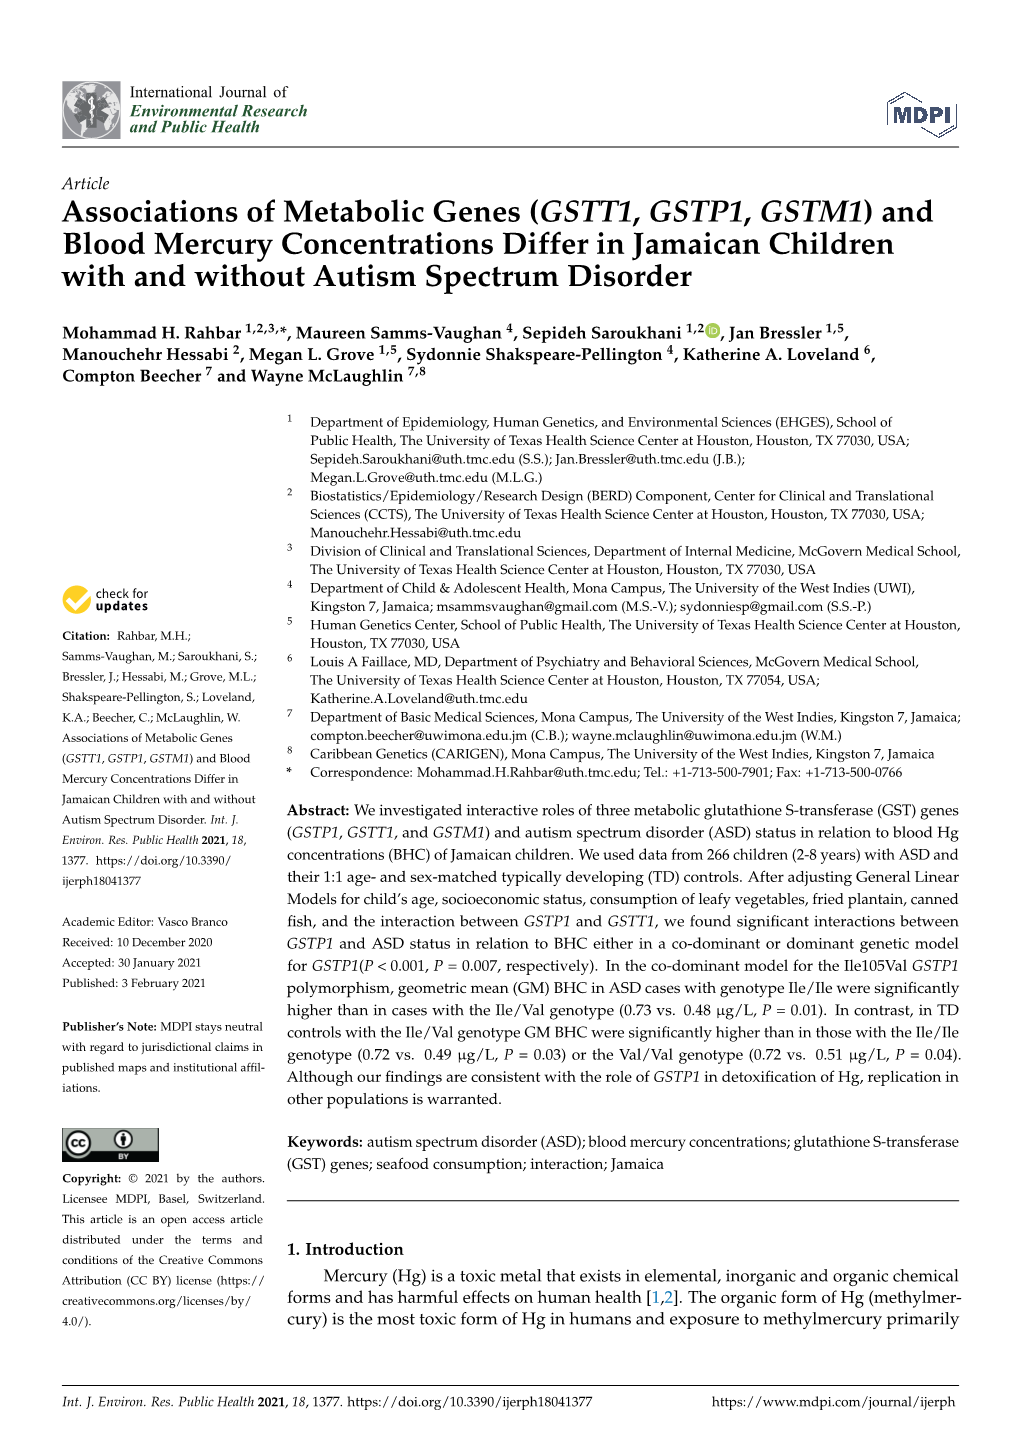 Associations of Metabolic Genes (GSTT1, GSTP1, GSTM1) and Blood Mercury Concentrations Differ in Jamaican Children with and Without Autism Spectrum Disorder